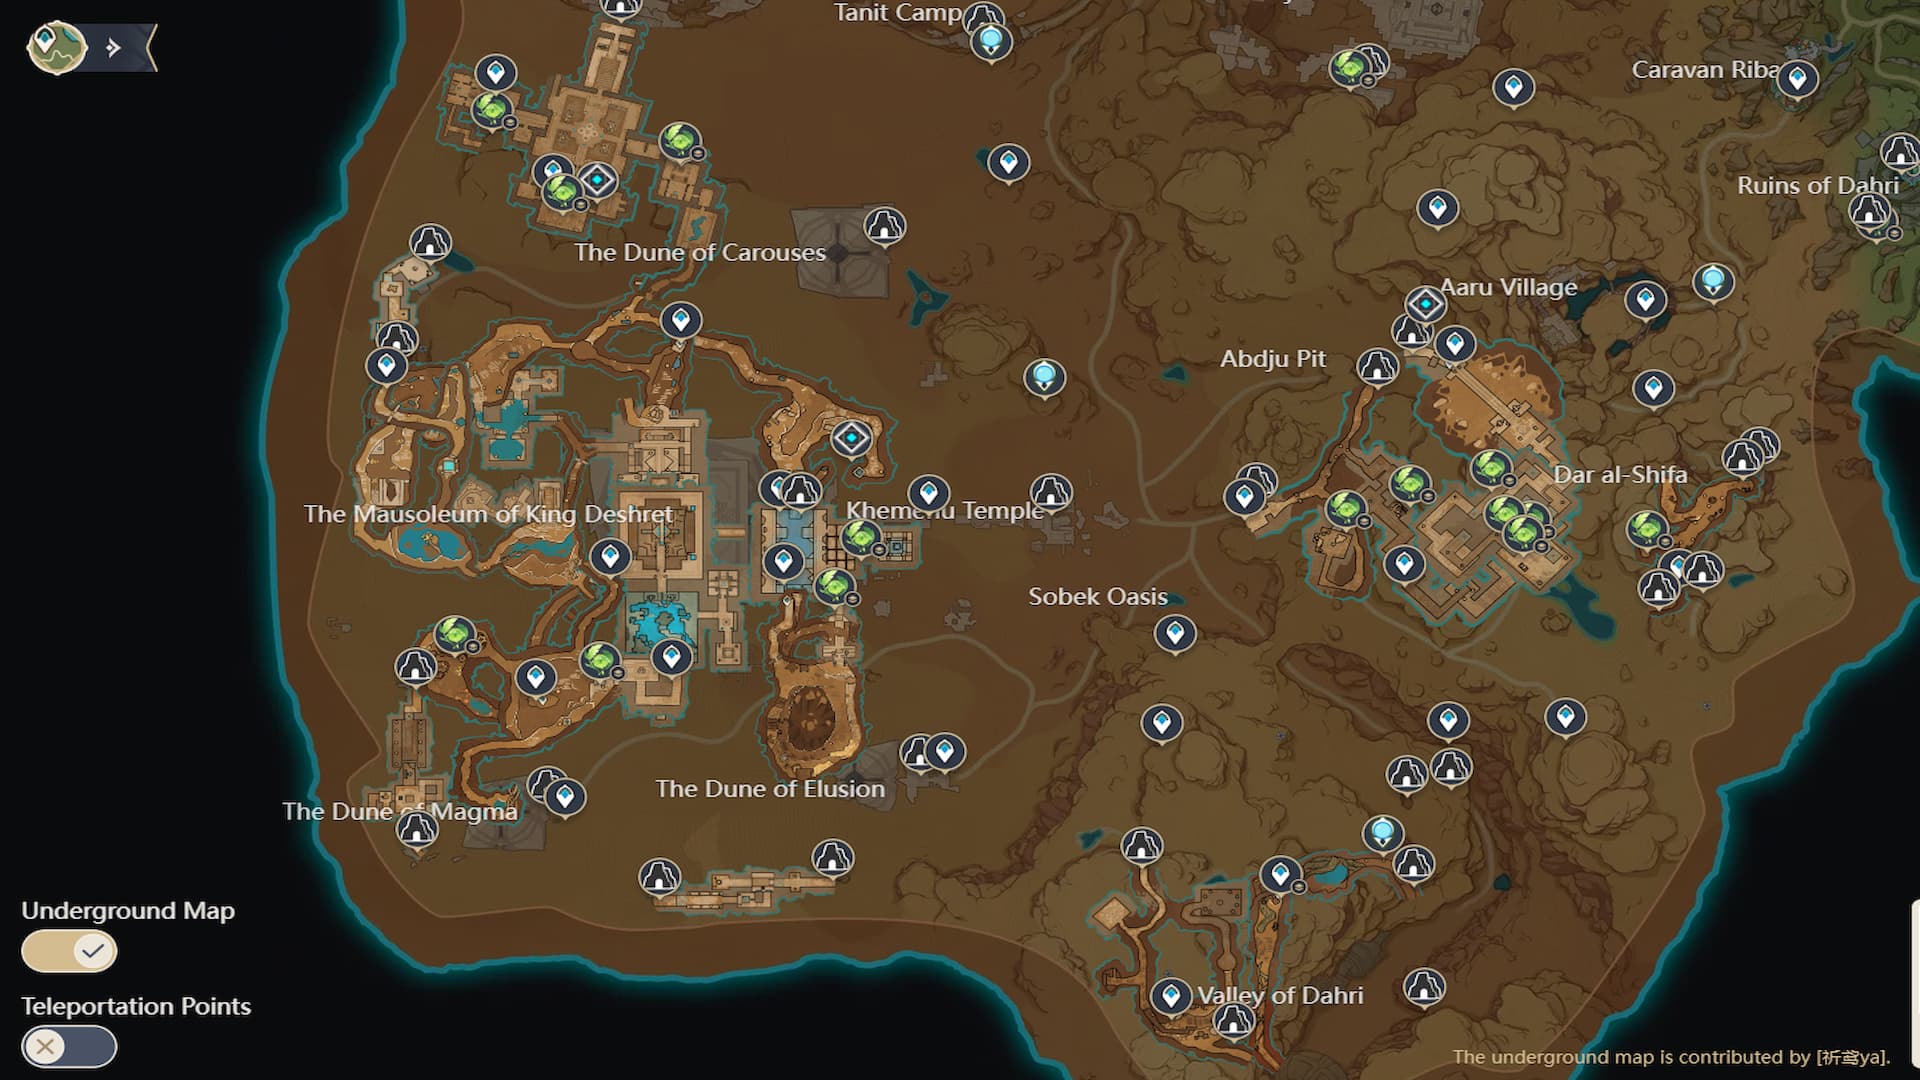 Genshin Impact adds Sumeru underground map in new HoYoLAB update: desert map with words and icons